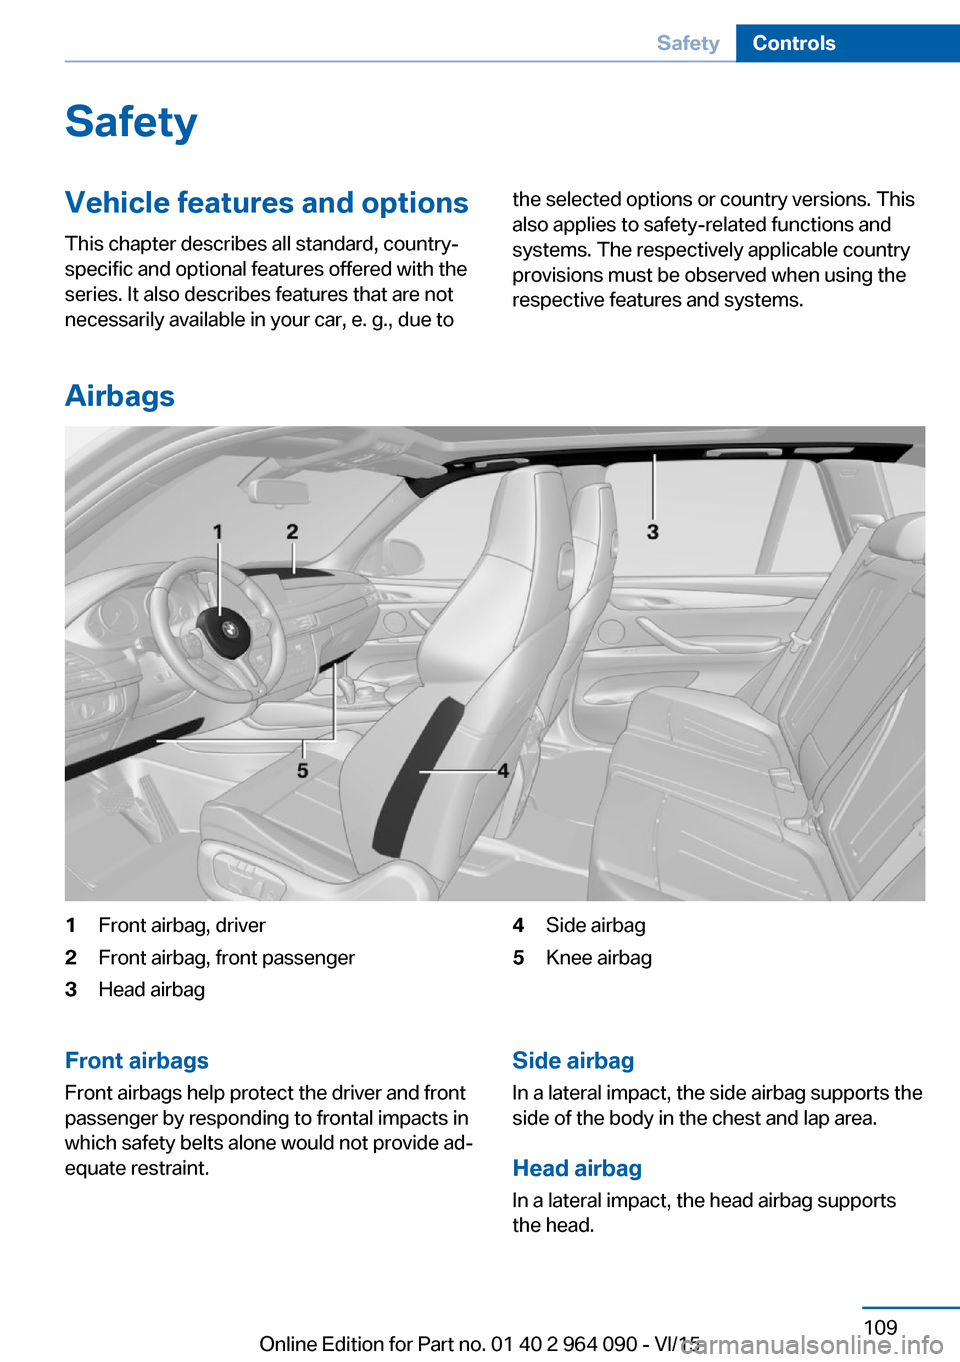 BMW X6M 2015 F86 Owners Manual SafetyVehicle features and options
This chapter describes all standard, country-
specific and optional features offered with the
series. It also describes features that are not
necessarily available i